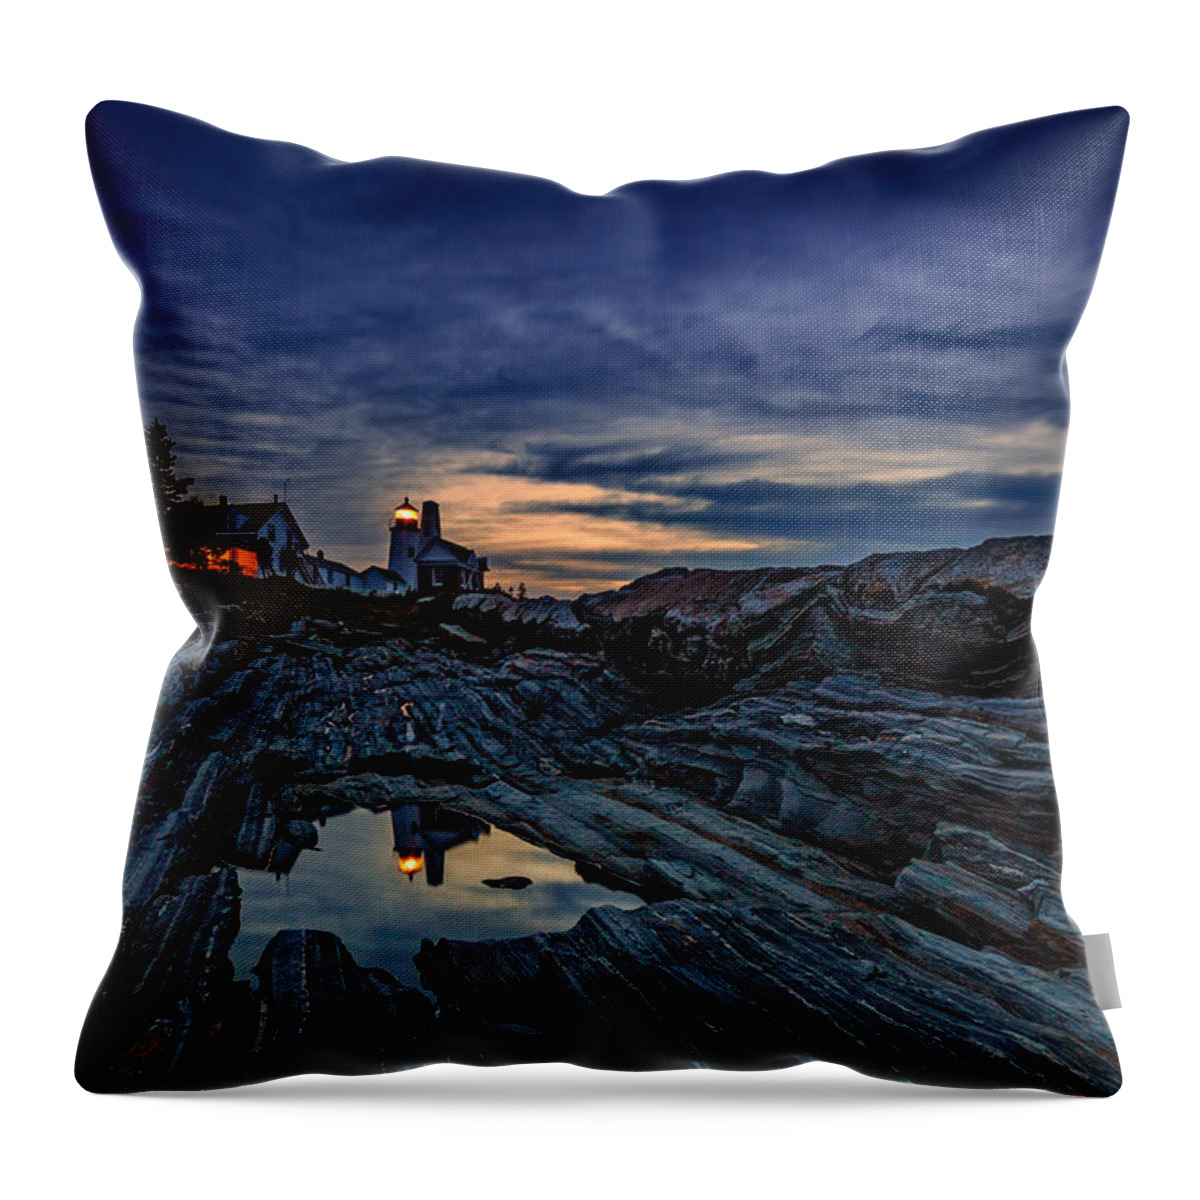 Pemaquid Point Lighthouse Throw Pillow featuring the photograph Pemaquid Reflections by Rick Berk